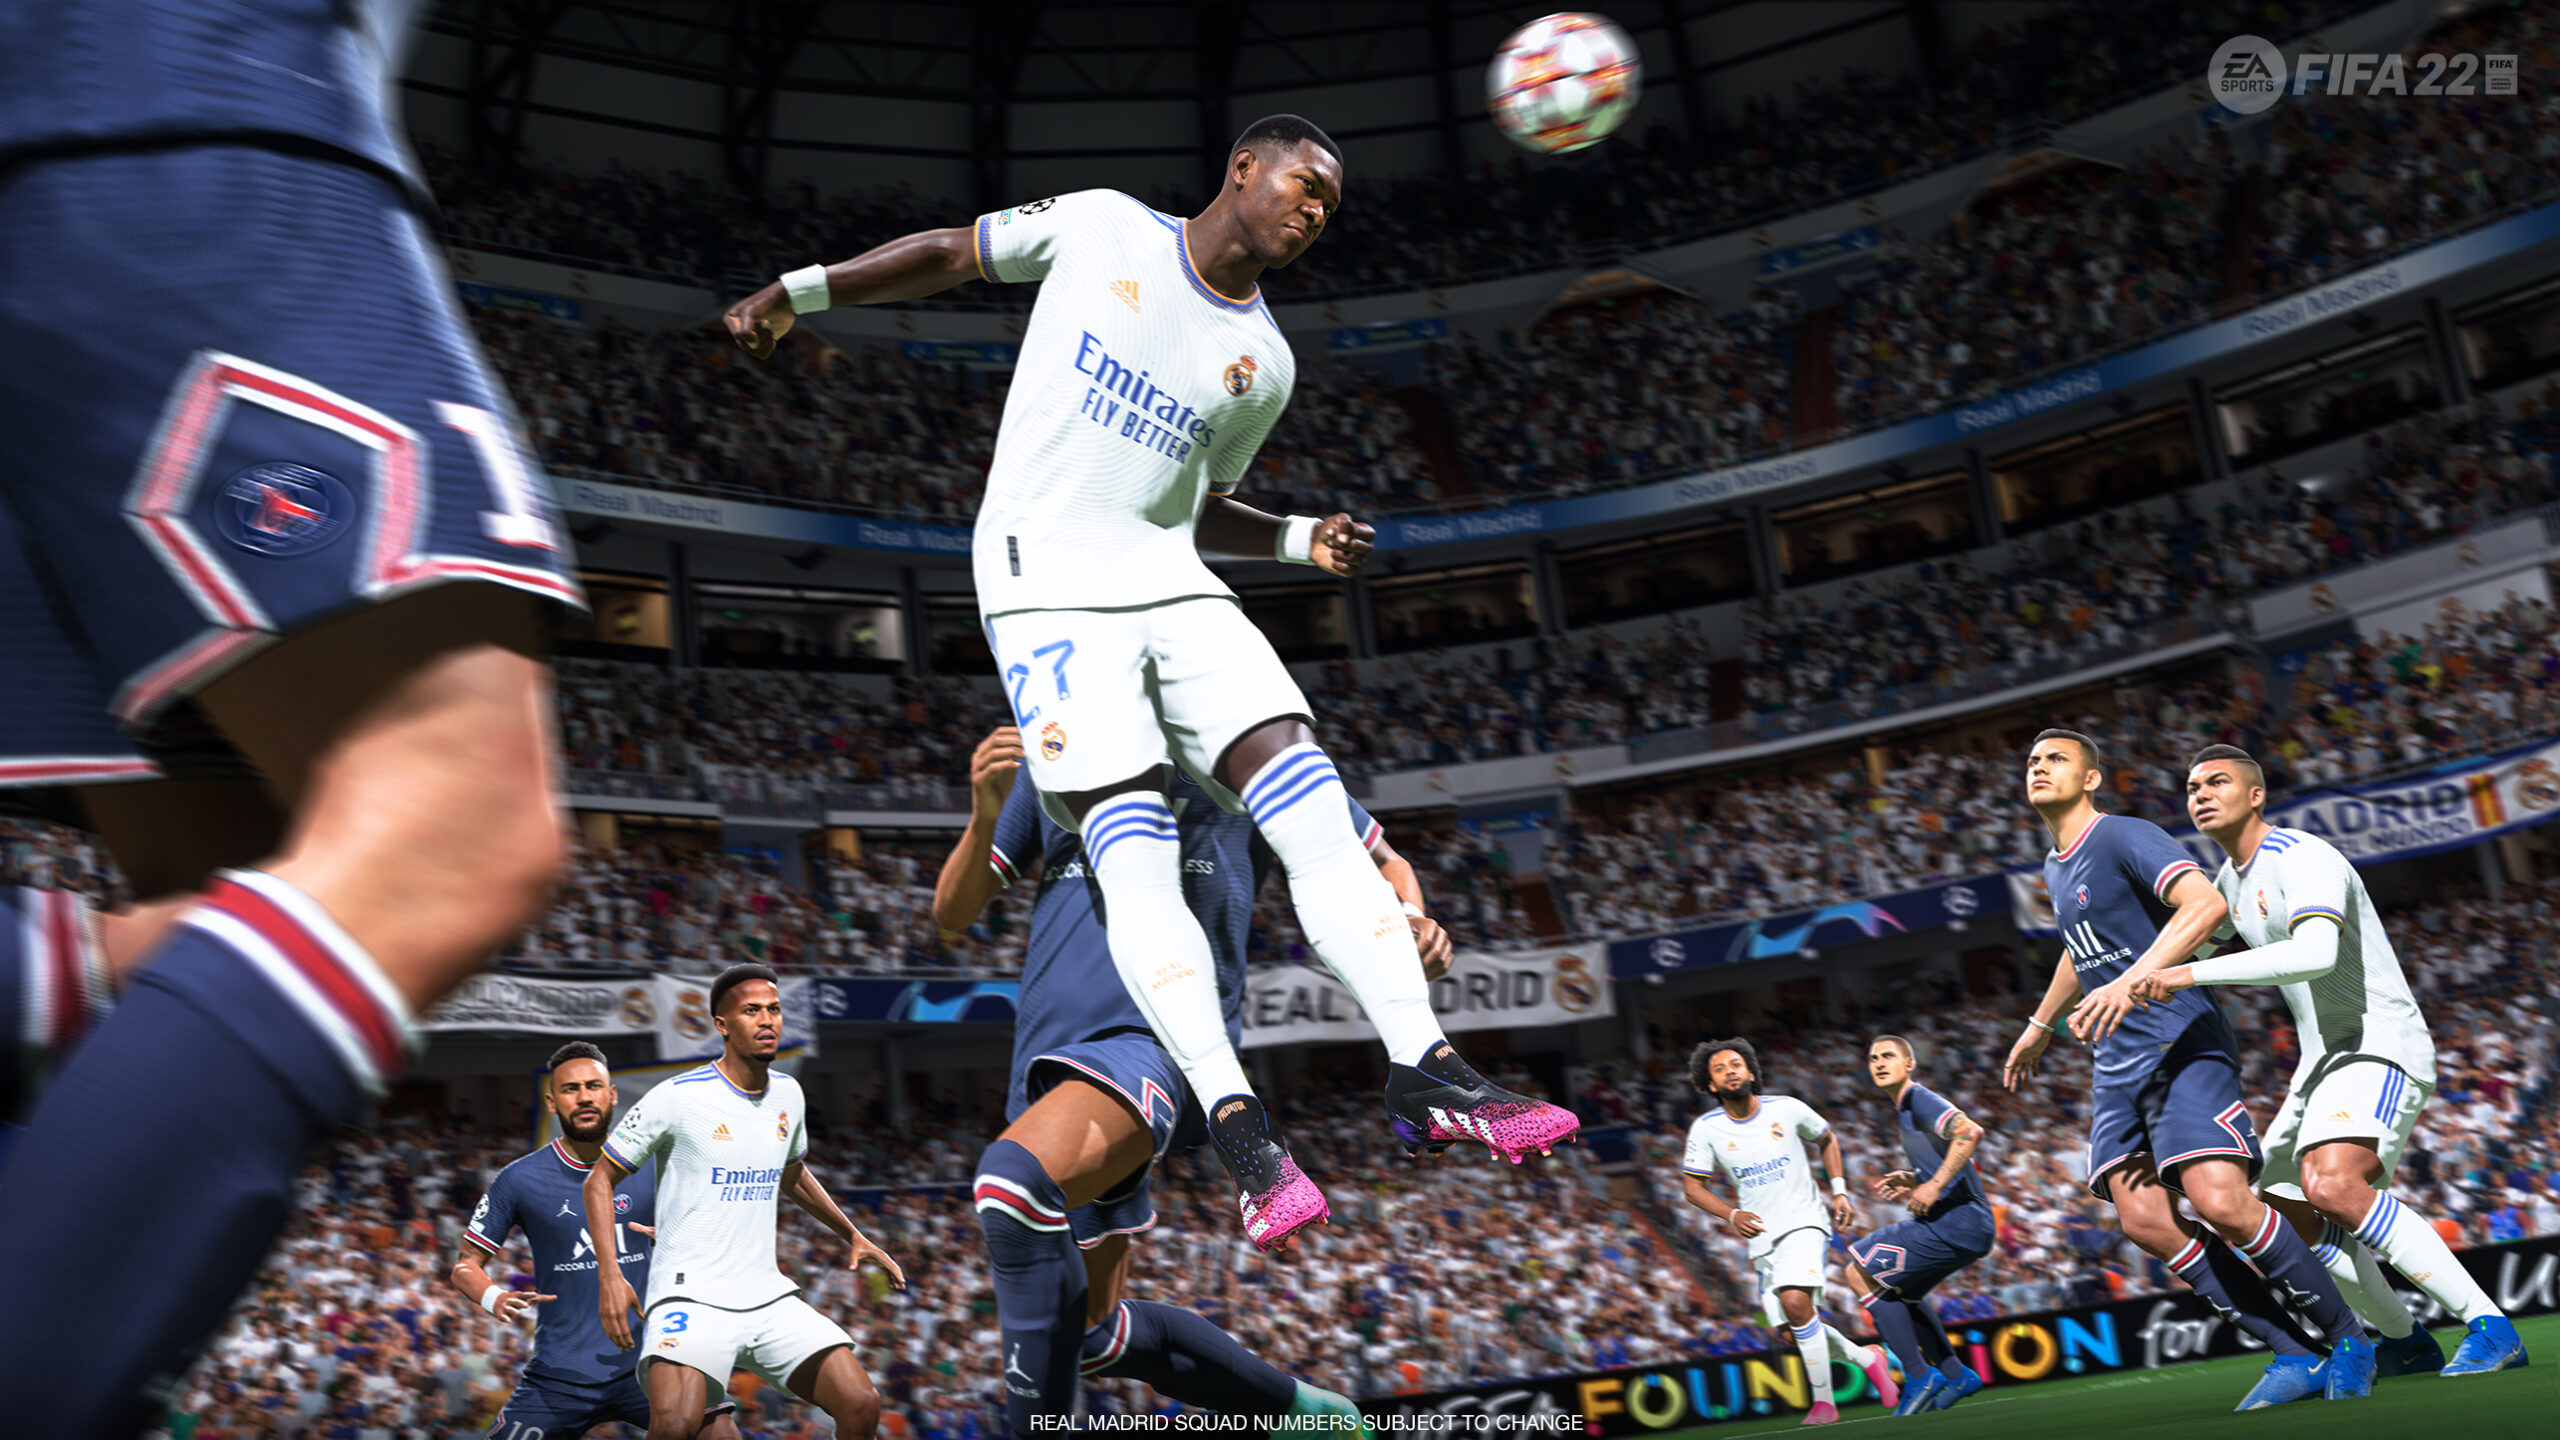 FIFA 23 Pro Clubs trailer shows seasonal progression and lobby games